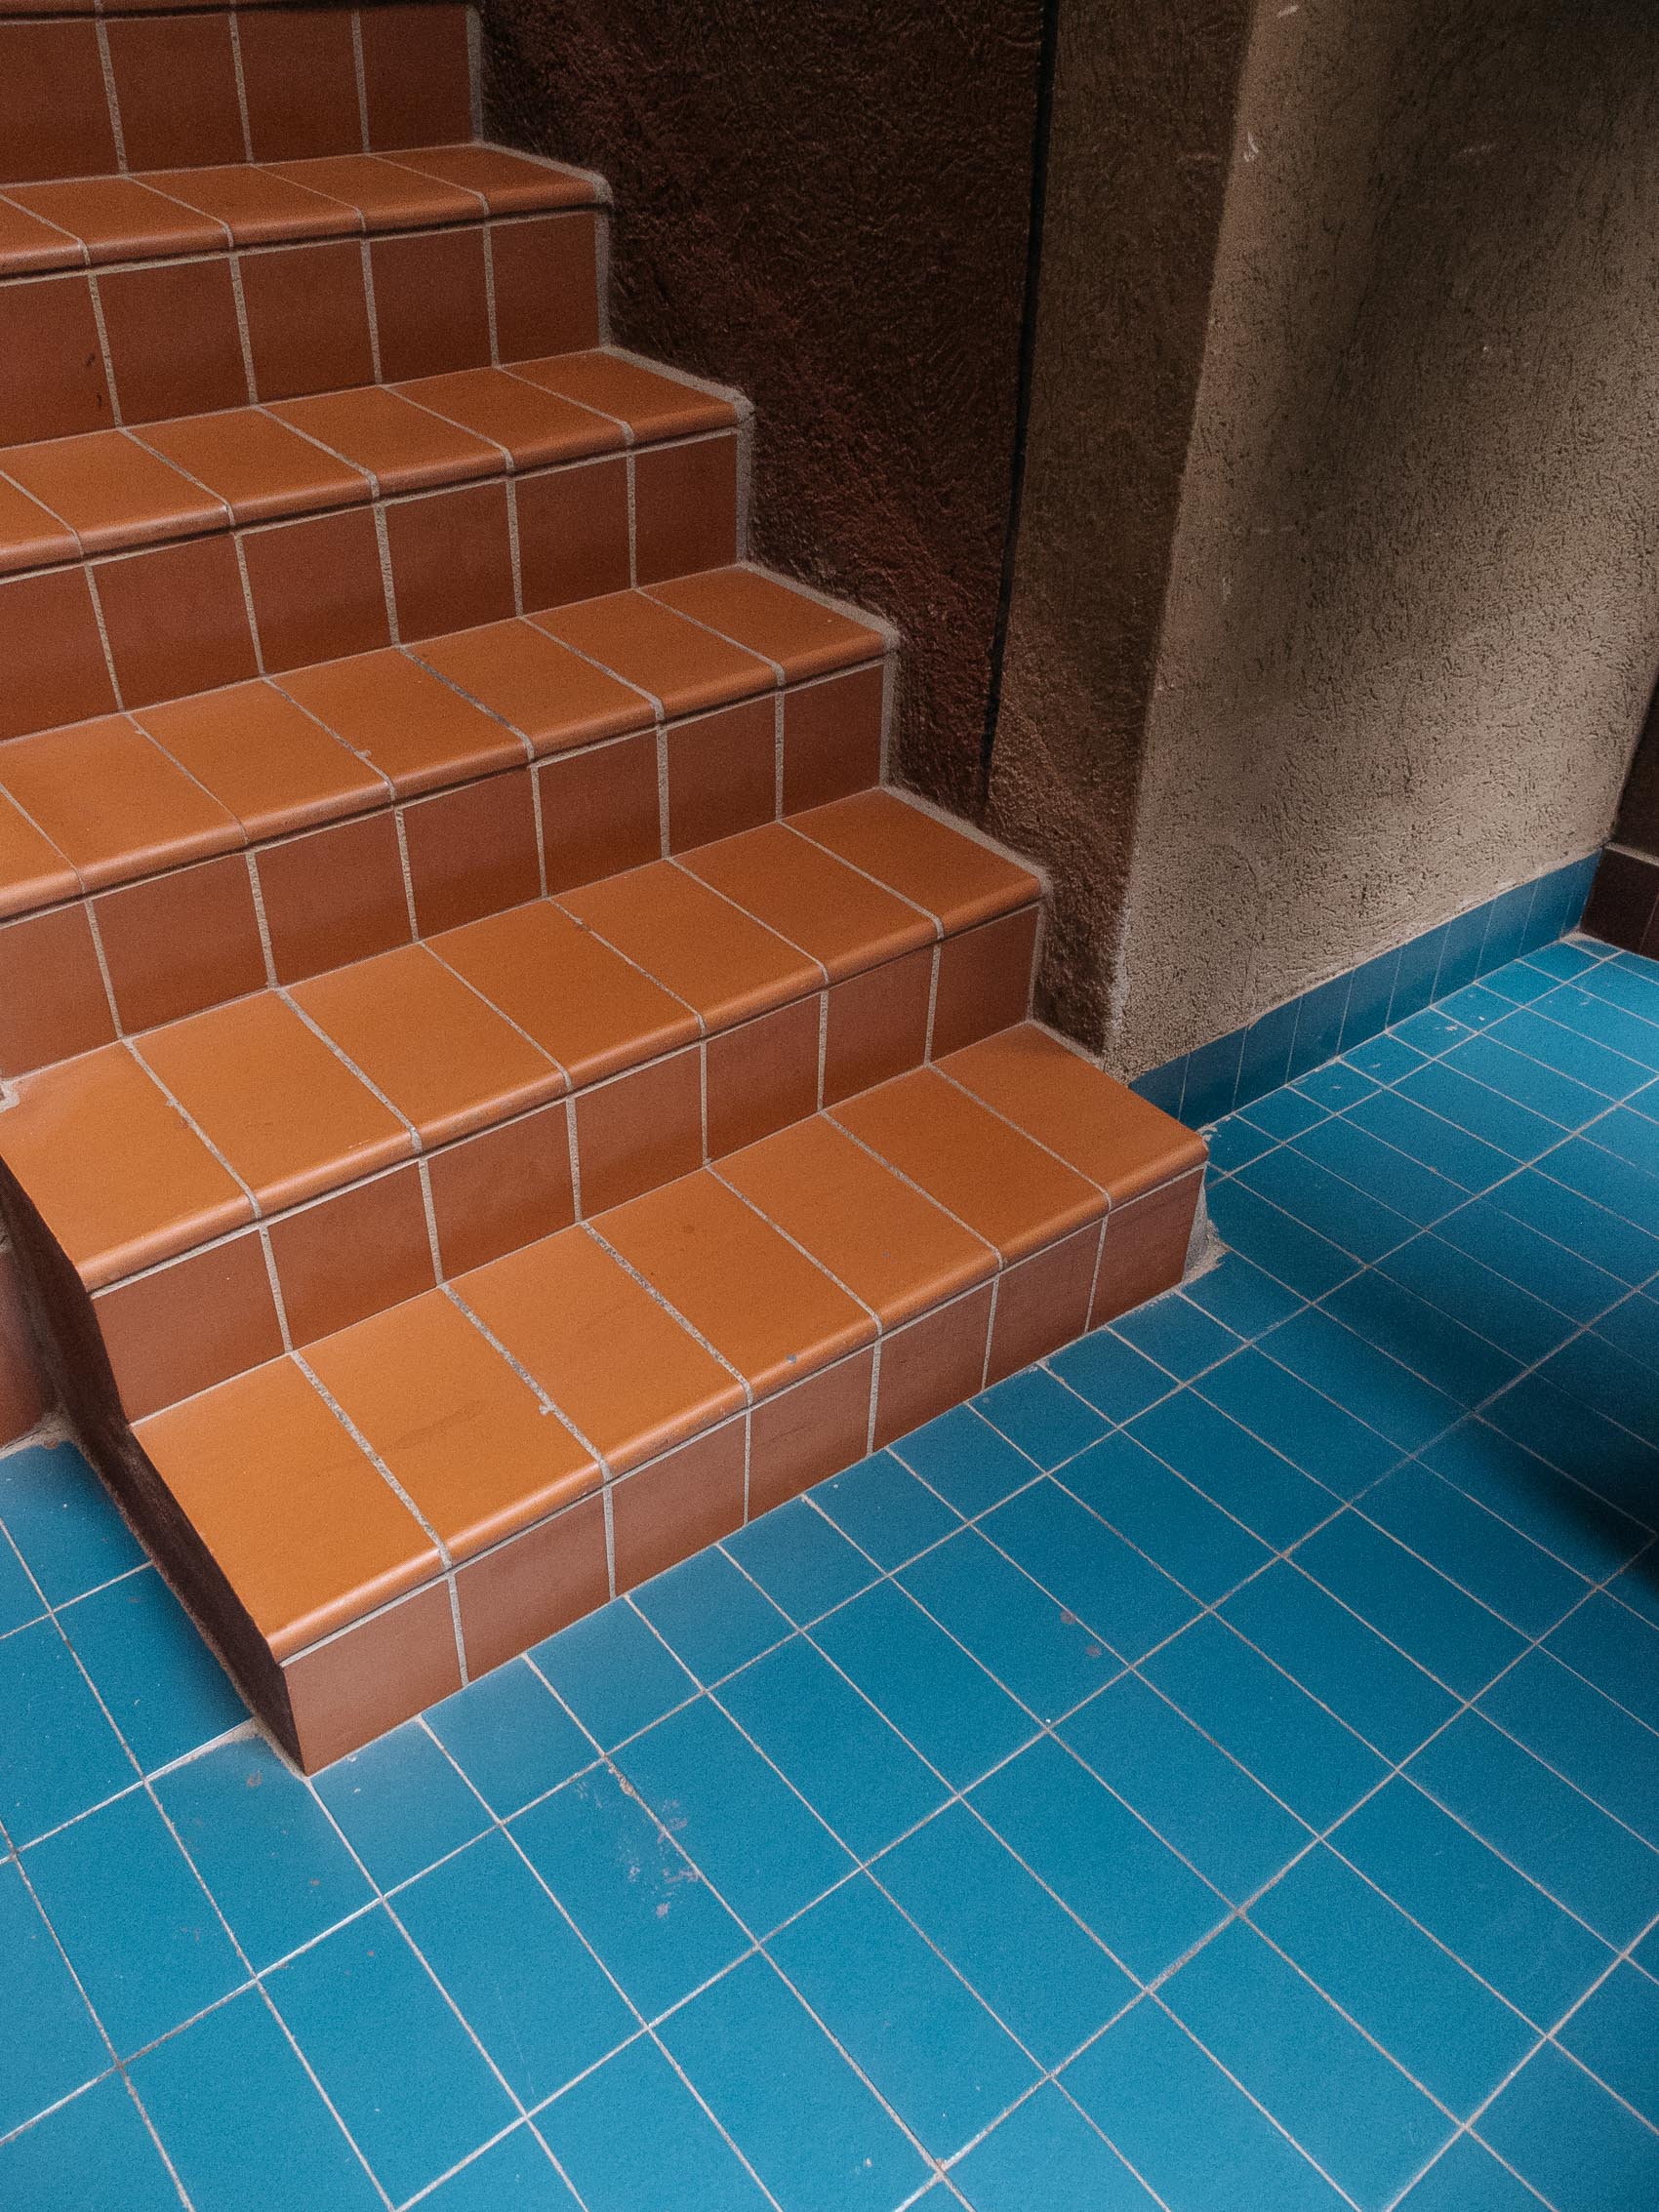 Walden 7 staircase with orange and blue tiles